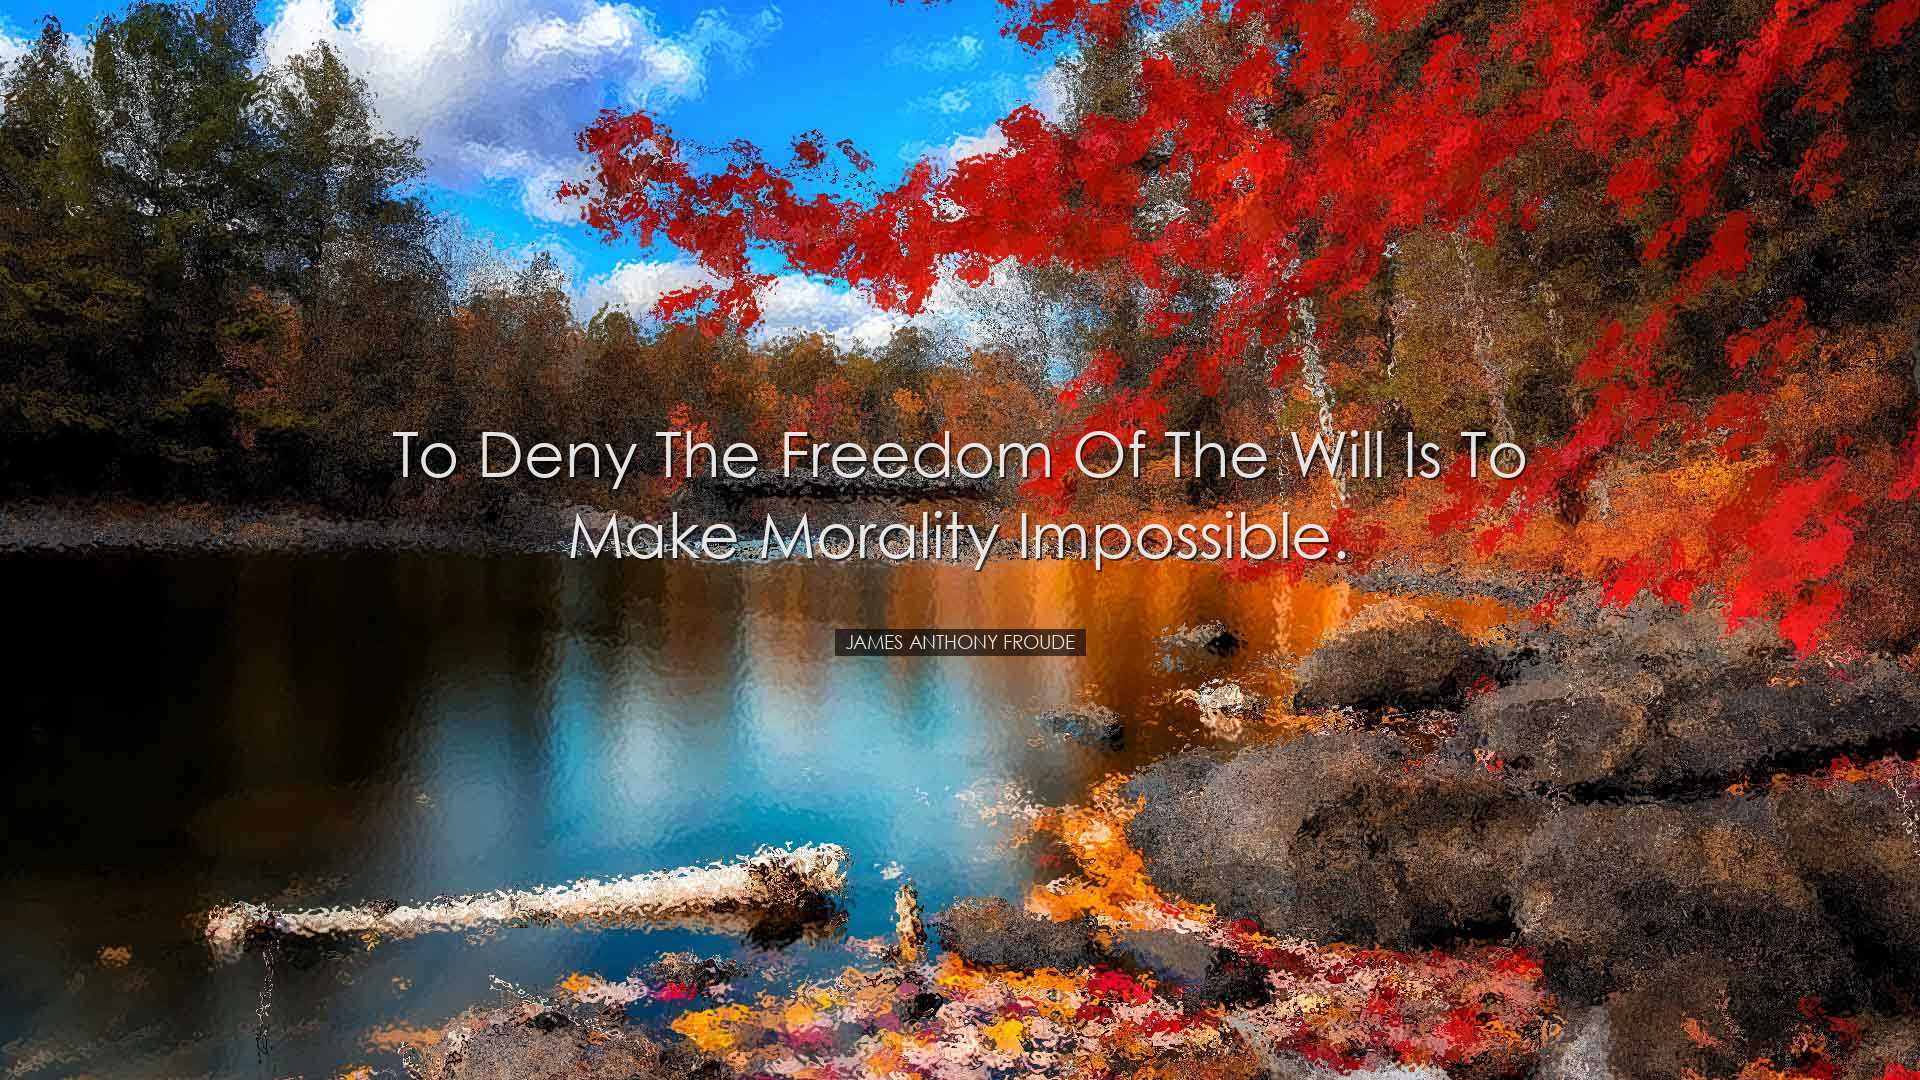 To deny the freedom of the will is to make morality impossible. -